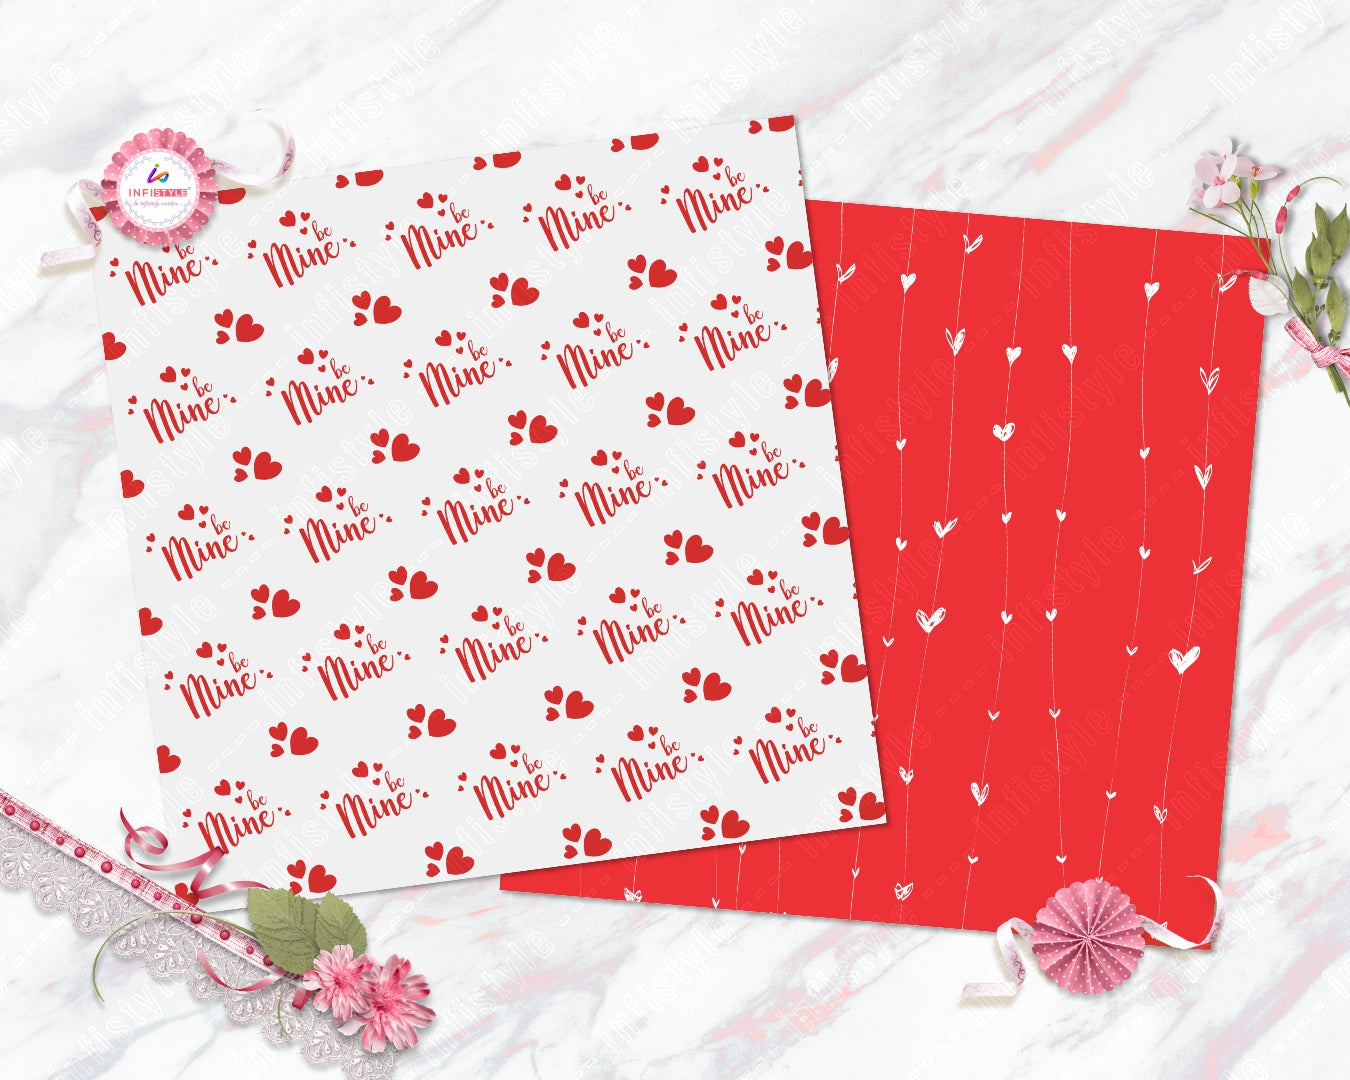 Valentine Paper Pattern Pack of 24 Sheets 250 gsm